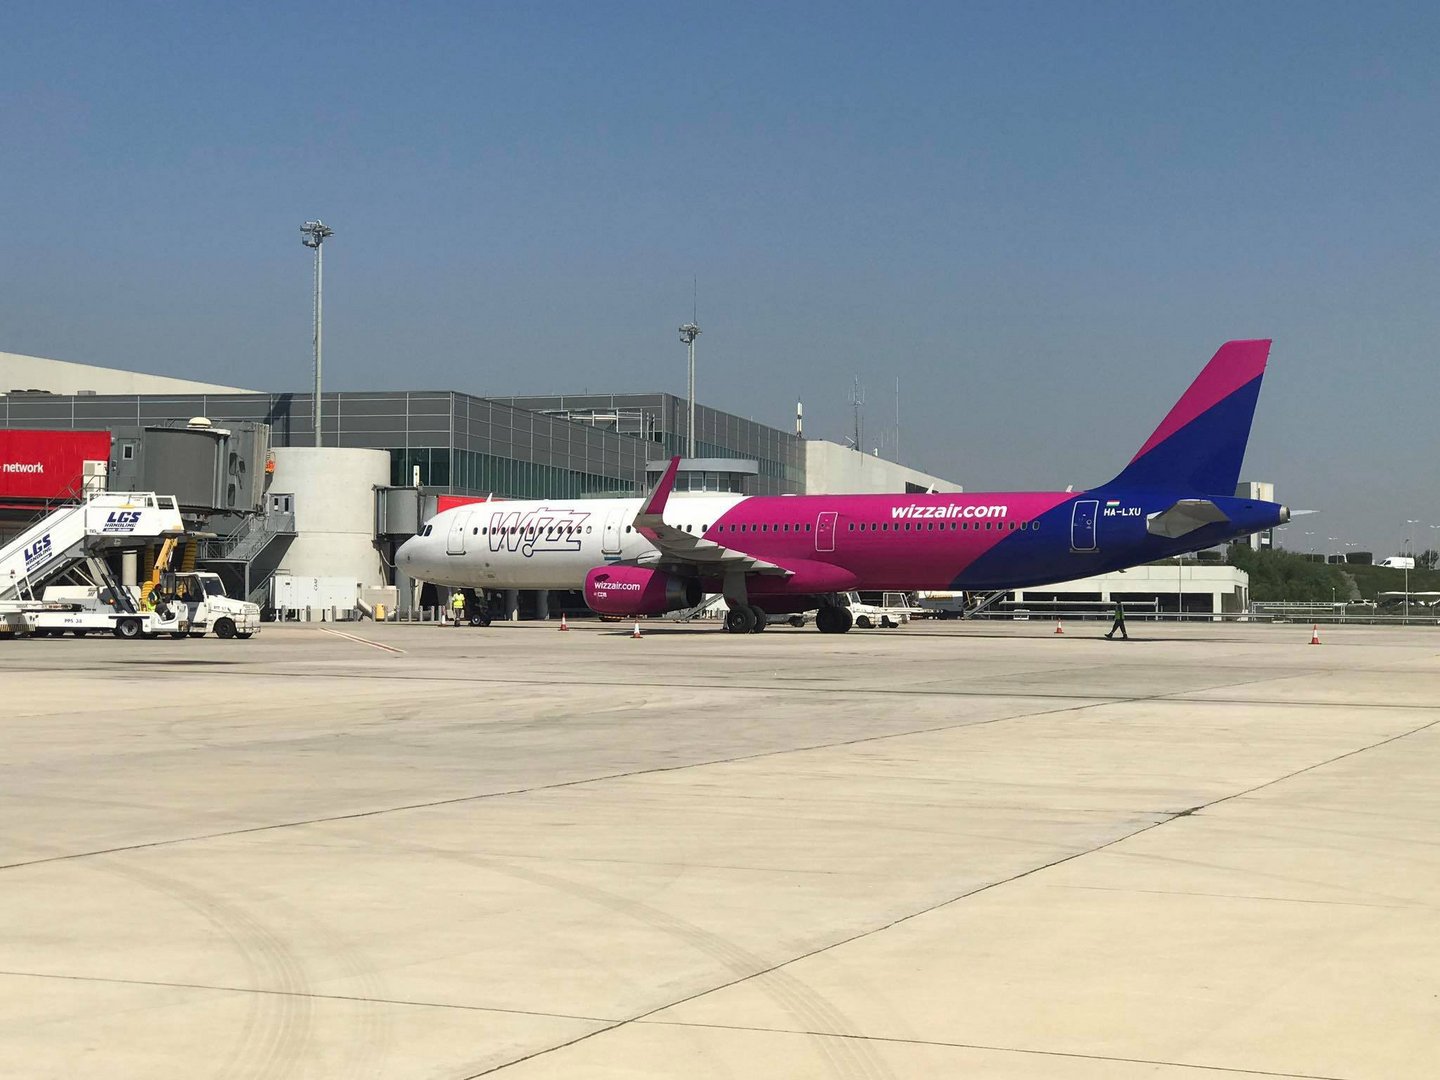 image Wizz Air announces new route to Abu Dhabi